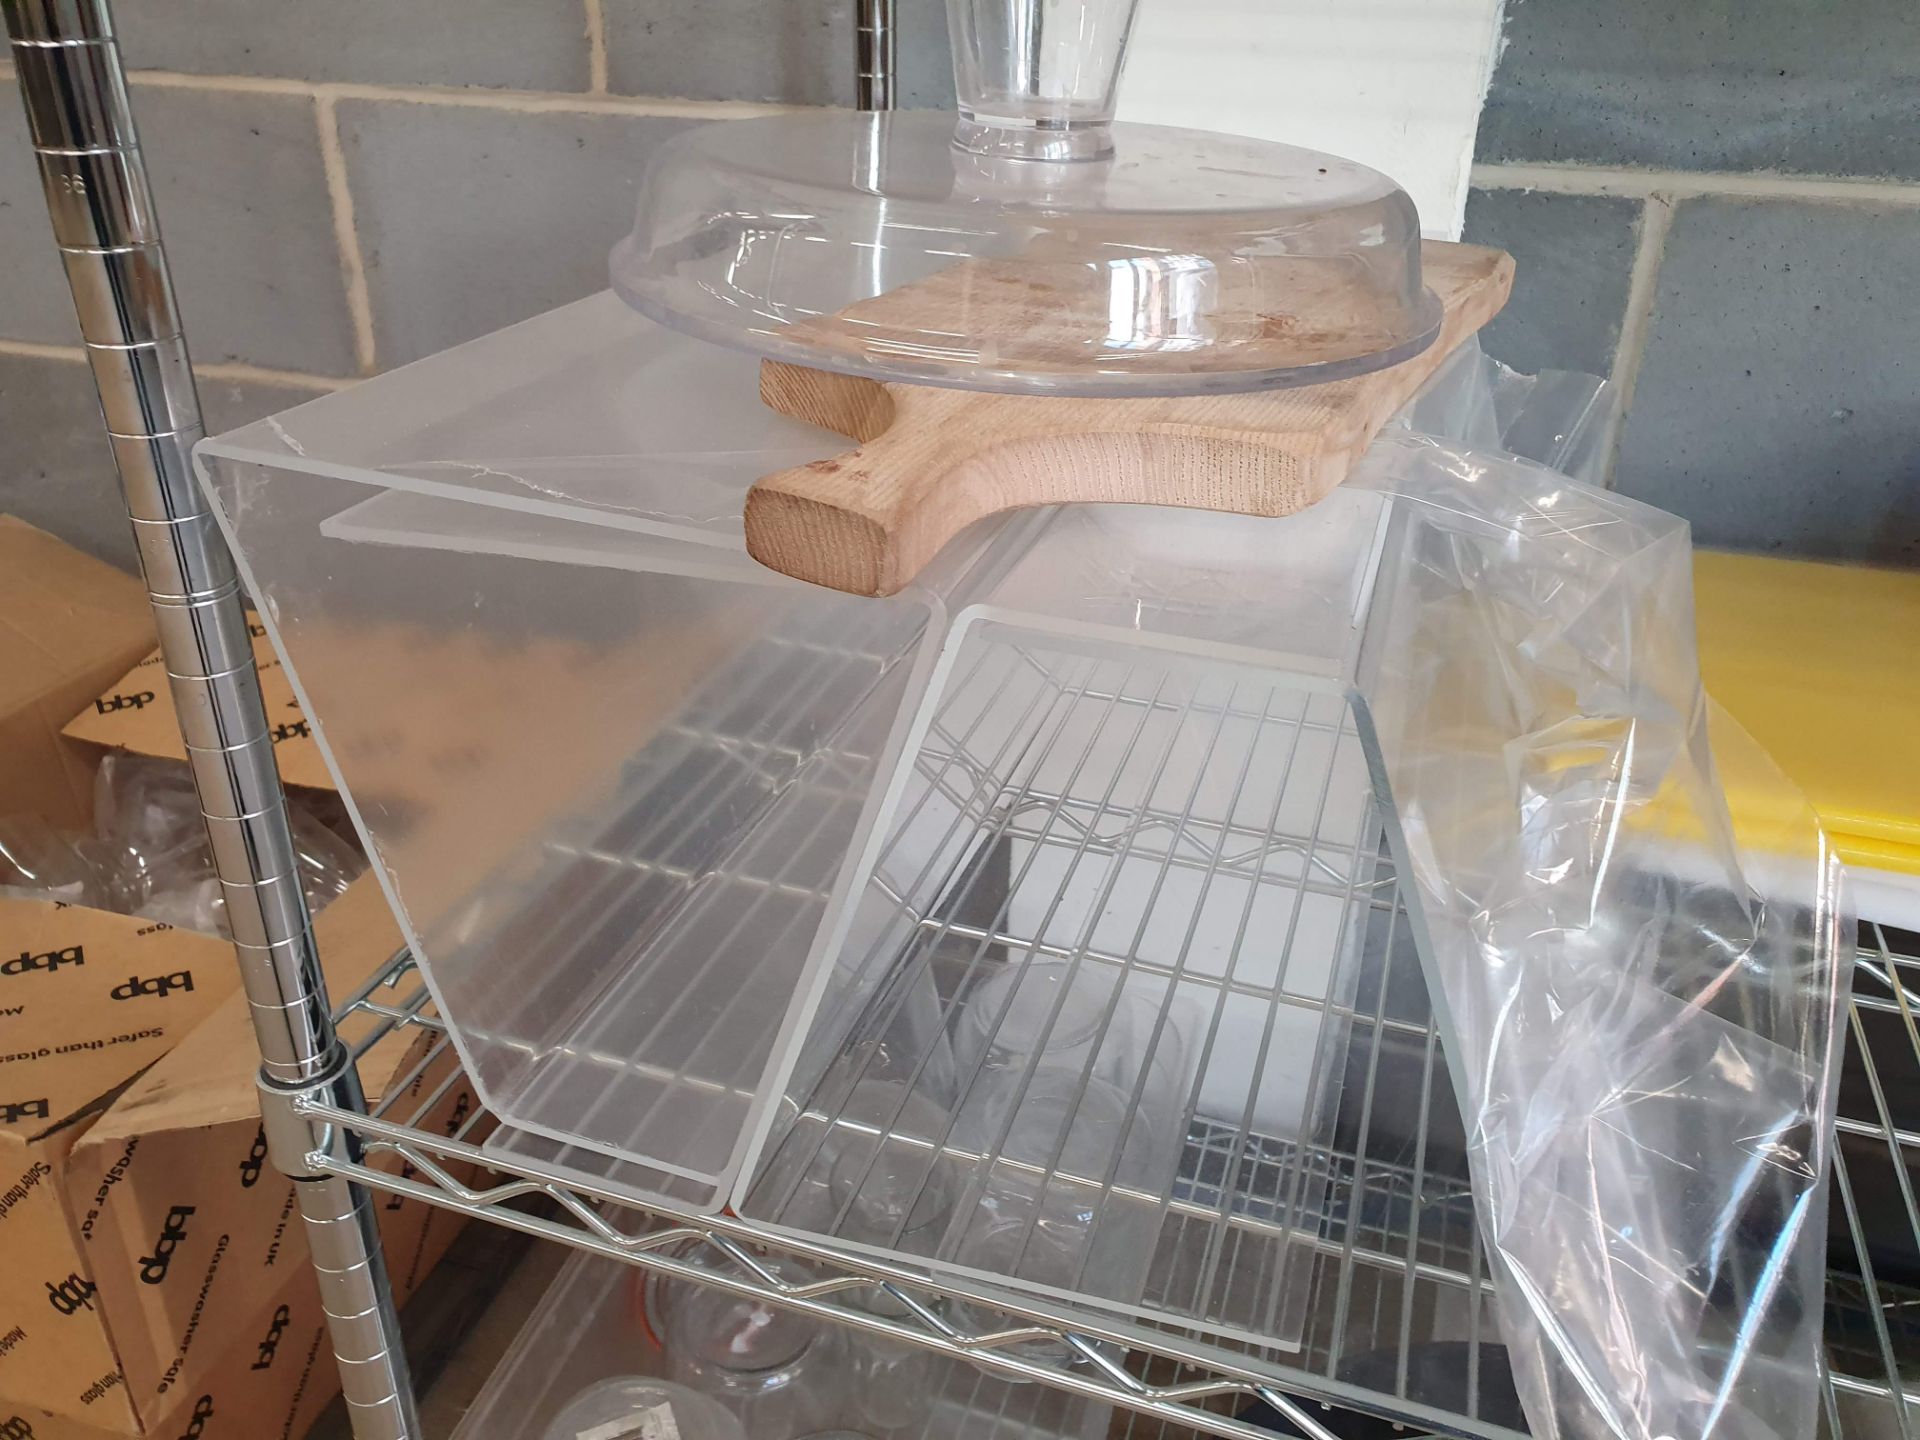 1 x Stainless Steel Wire Shelf Rack With Contents - Contents Include Chopping Boards, Till Rolls and - Image 7 of 8